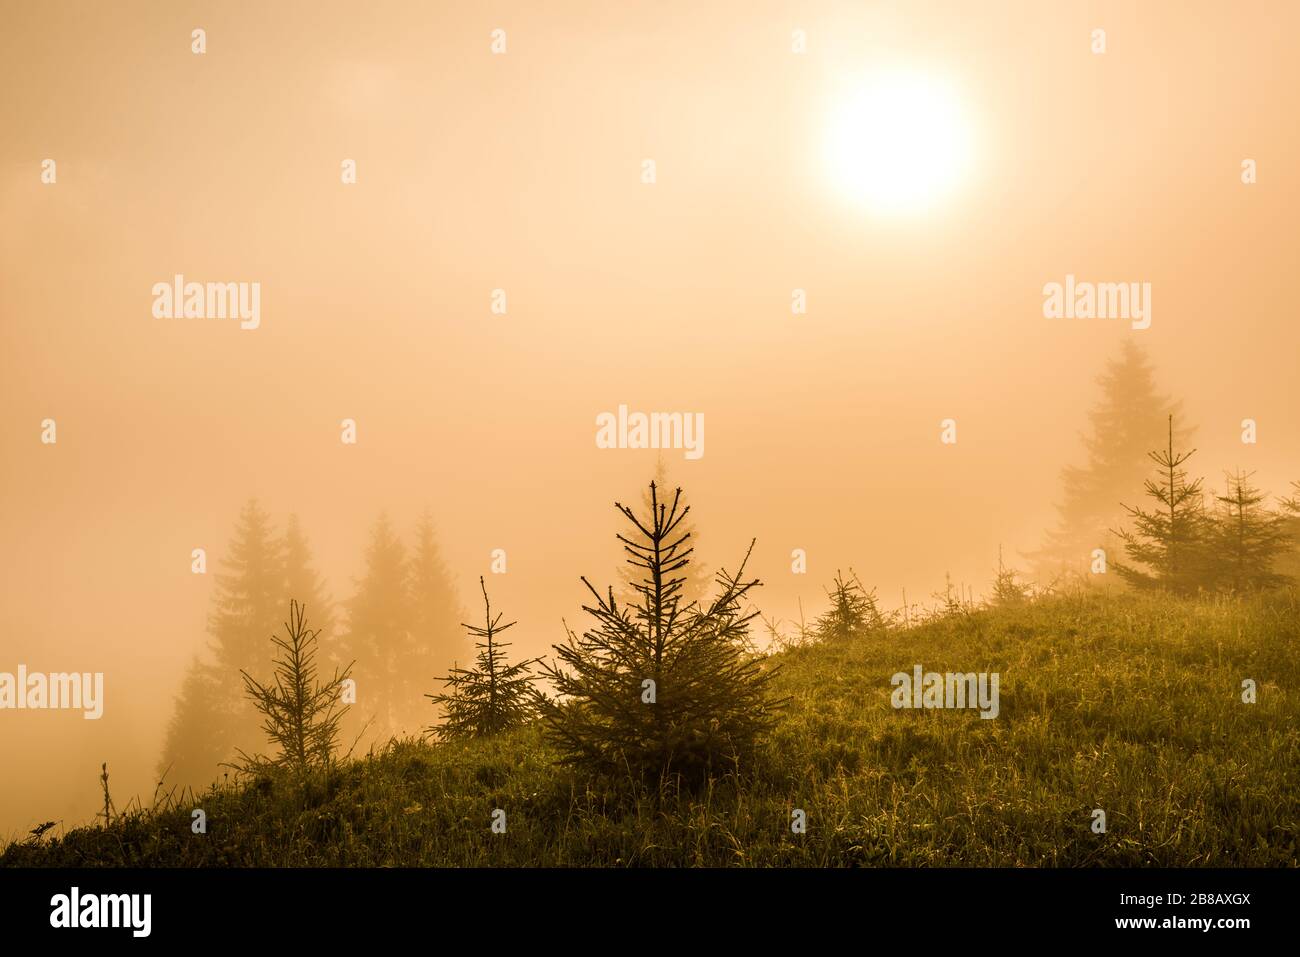 Magical mesmerizing landscape of young fir trees growing on green hills among dense fog on a warm summer morning against a blue sky. Beauty concept of Stock Photo